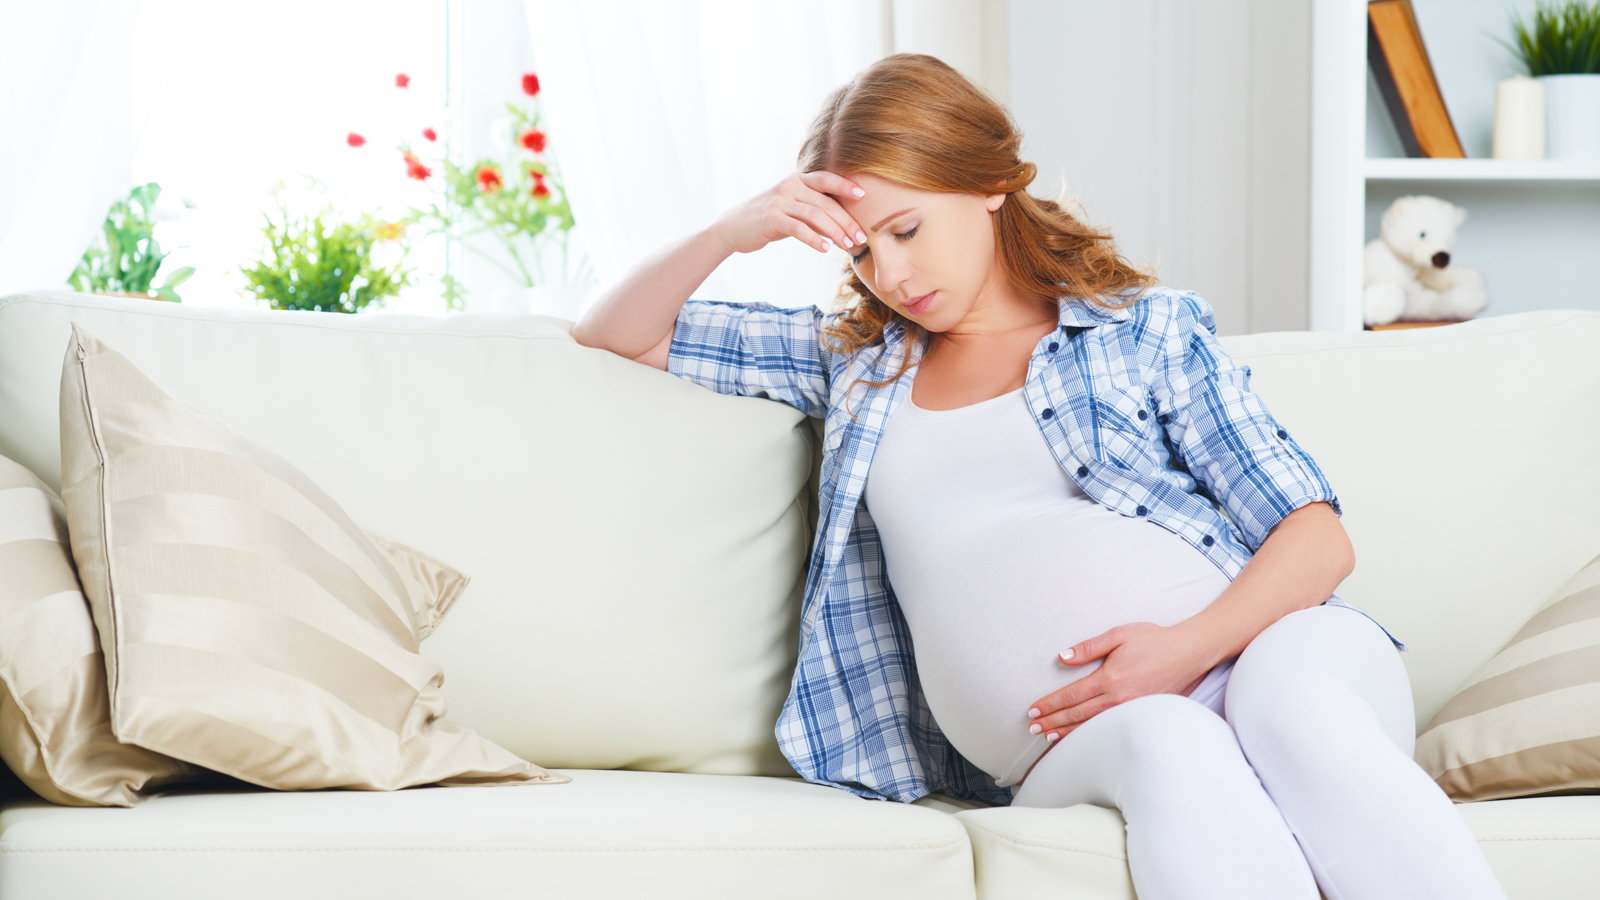 A pregnant woman sitting on a couch